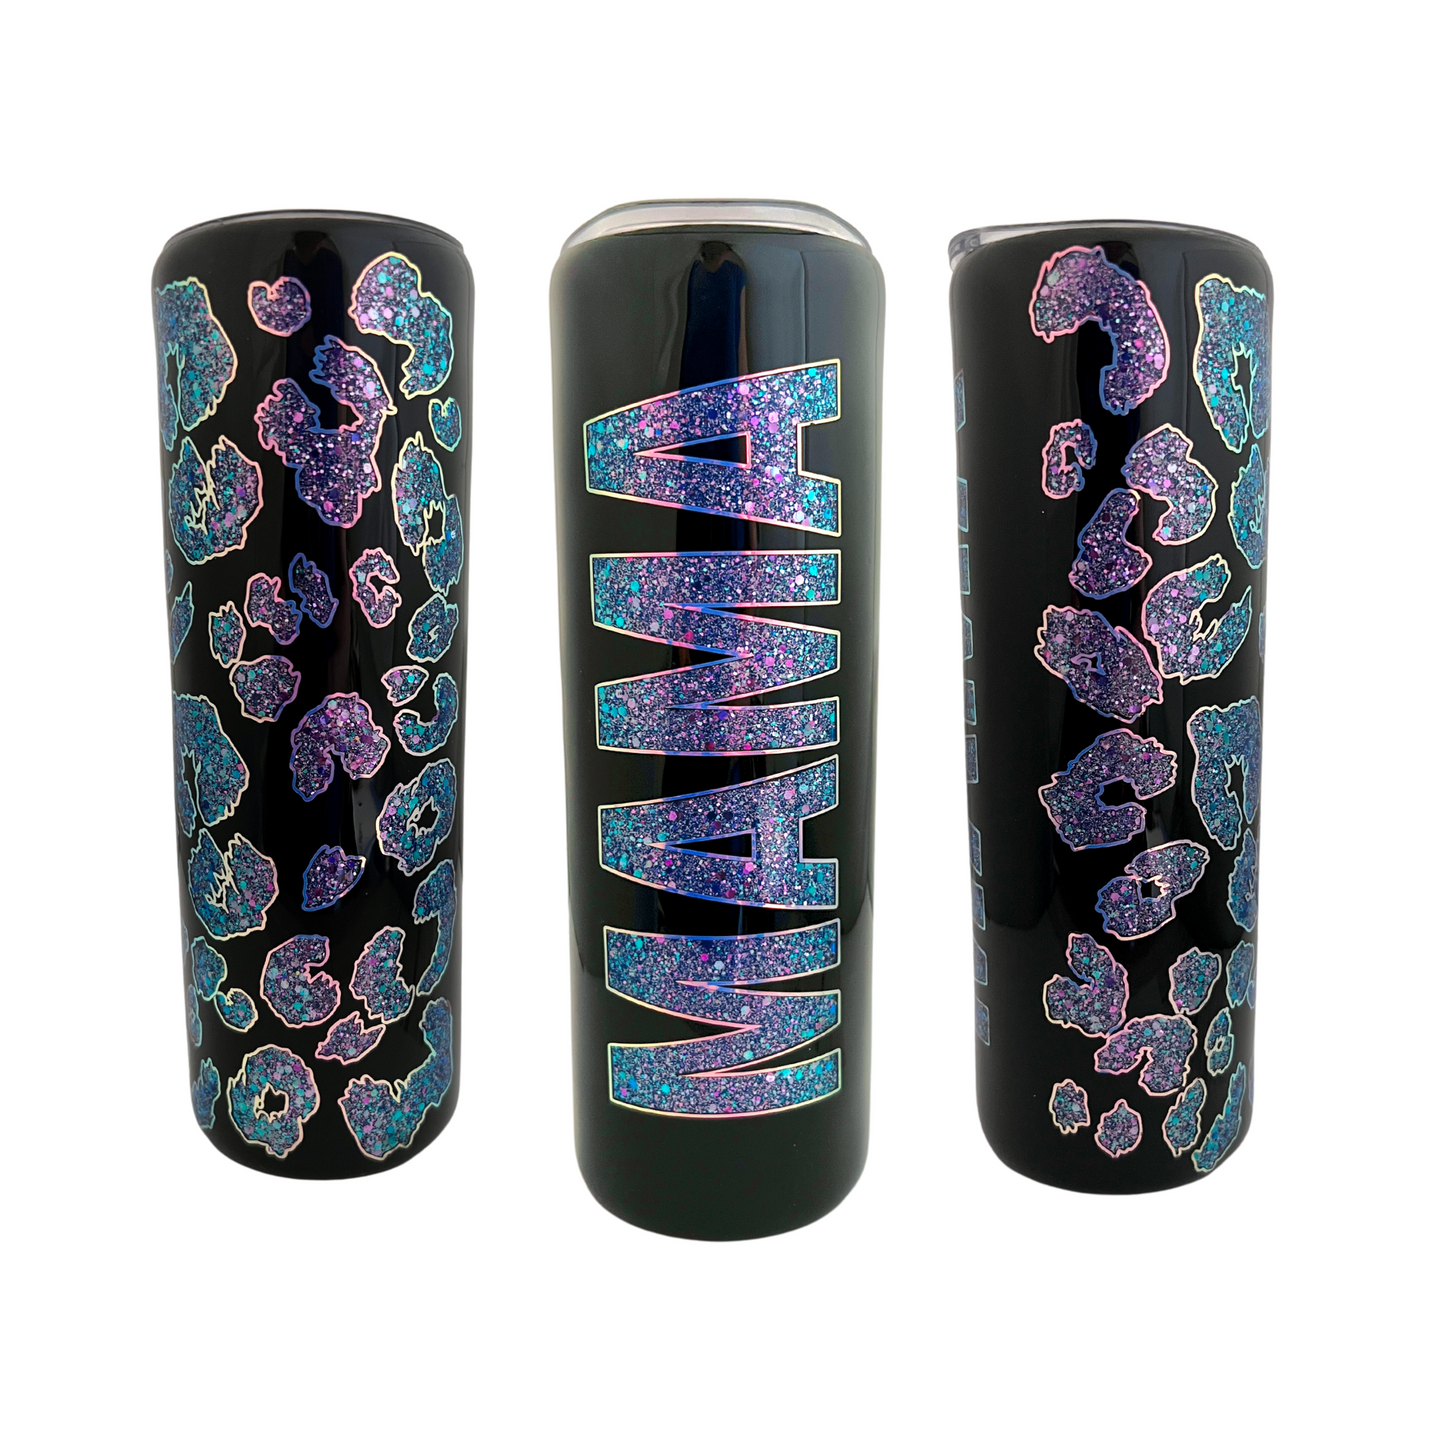 30oz Mama Tumbler with Cheetah Peek-A-Boo Purples and Blue Glitter, Stainless Steel Tumbler  - by Cristina